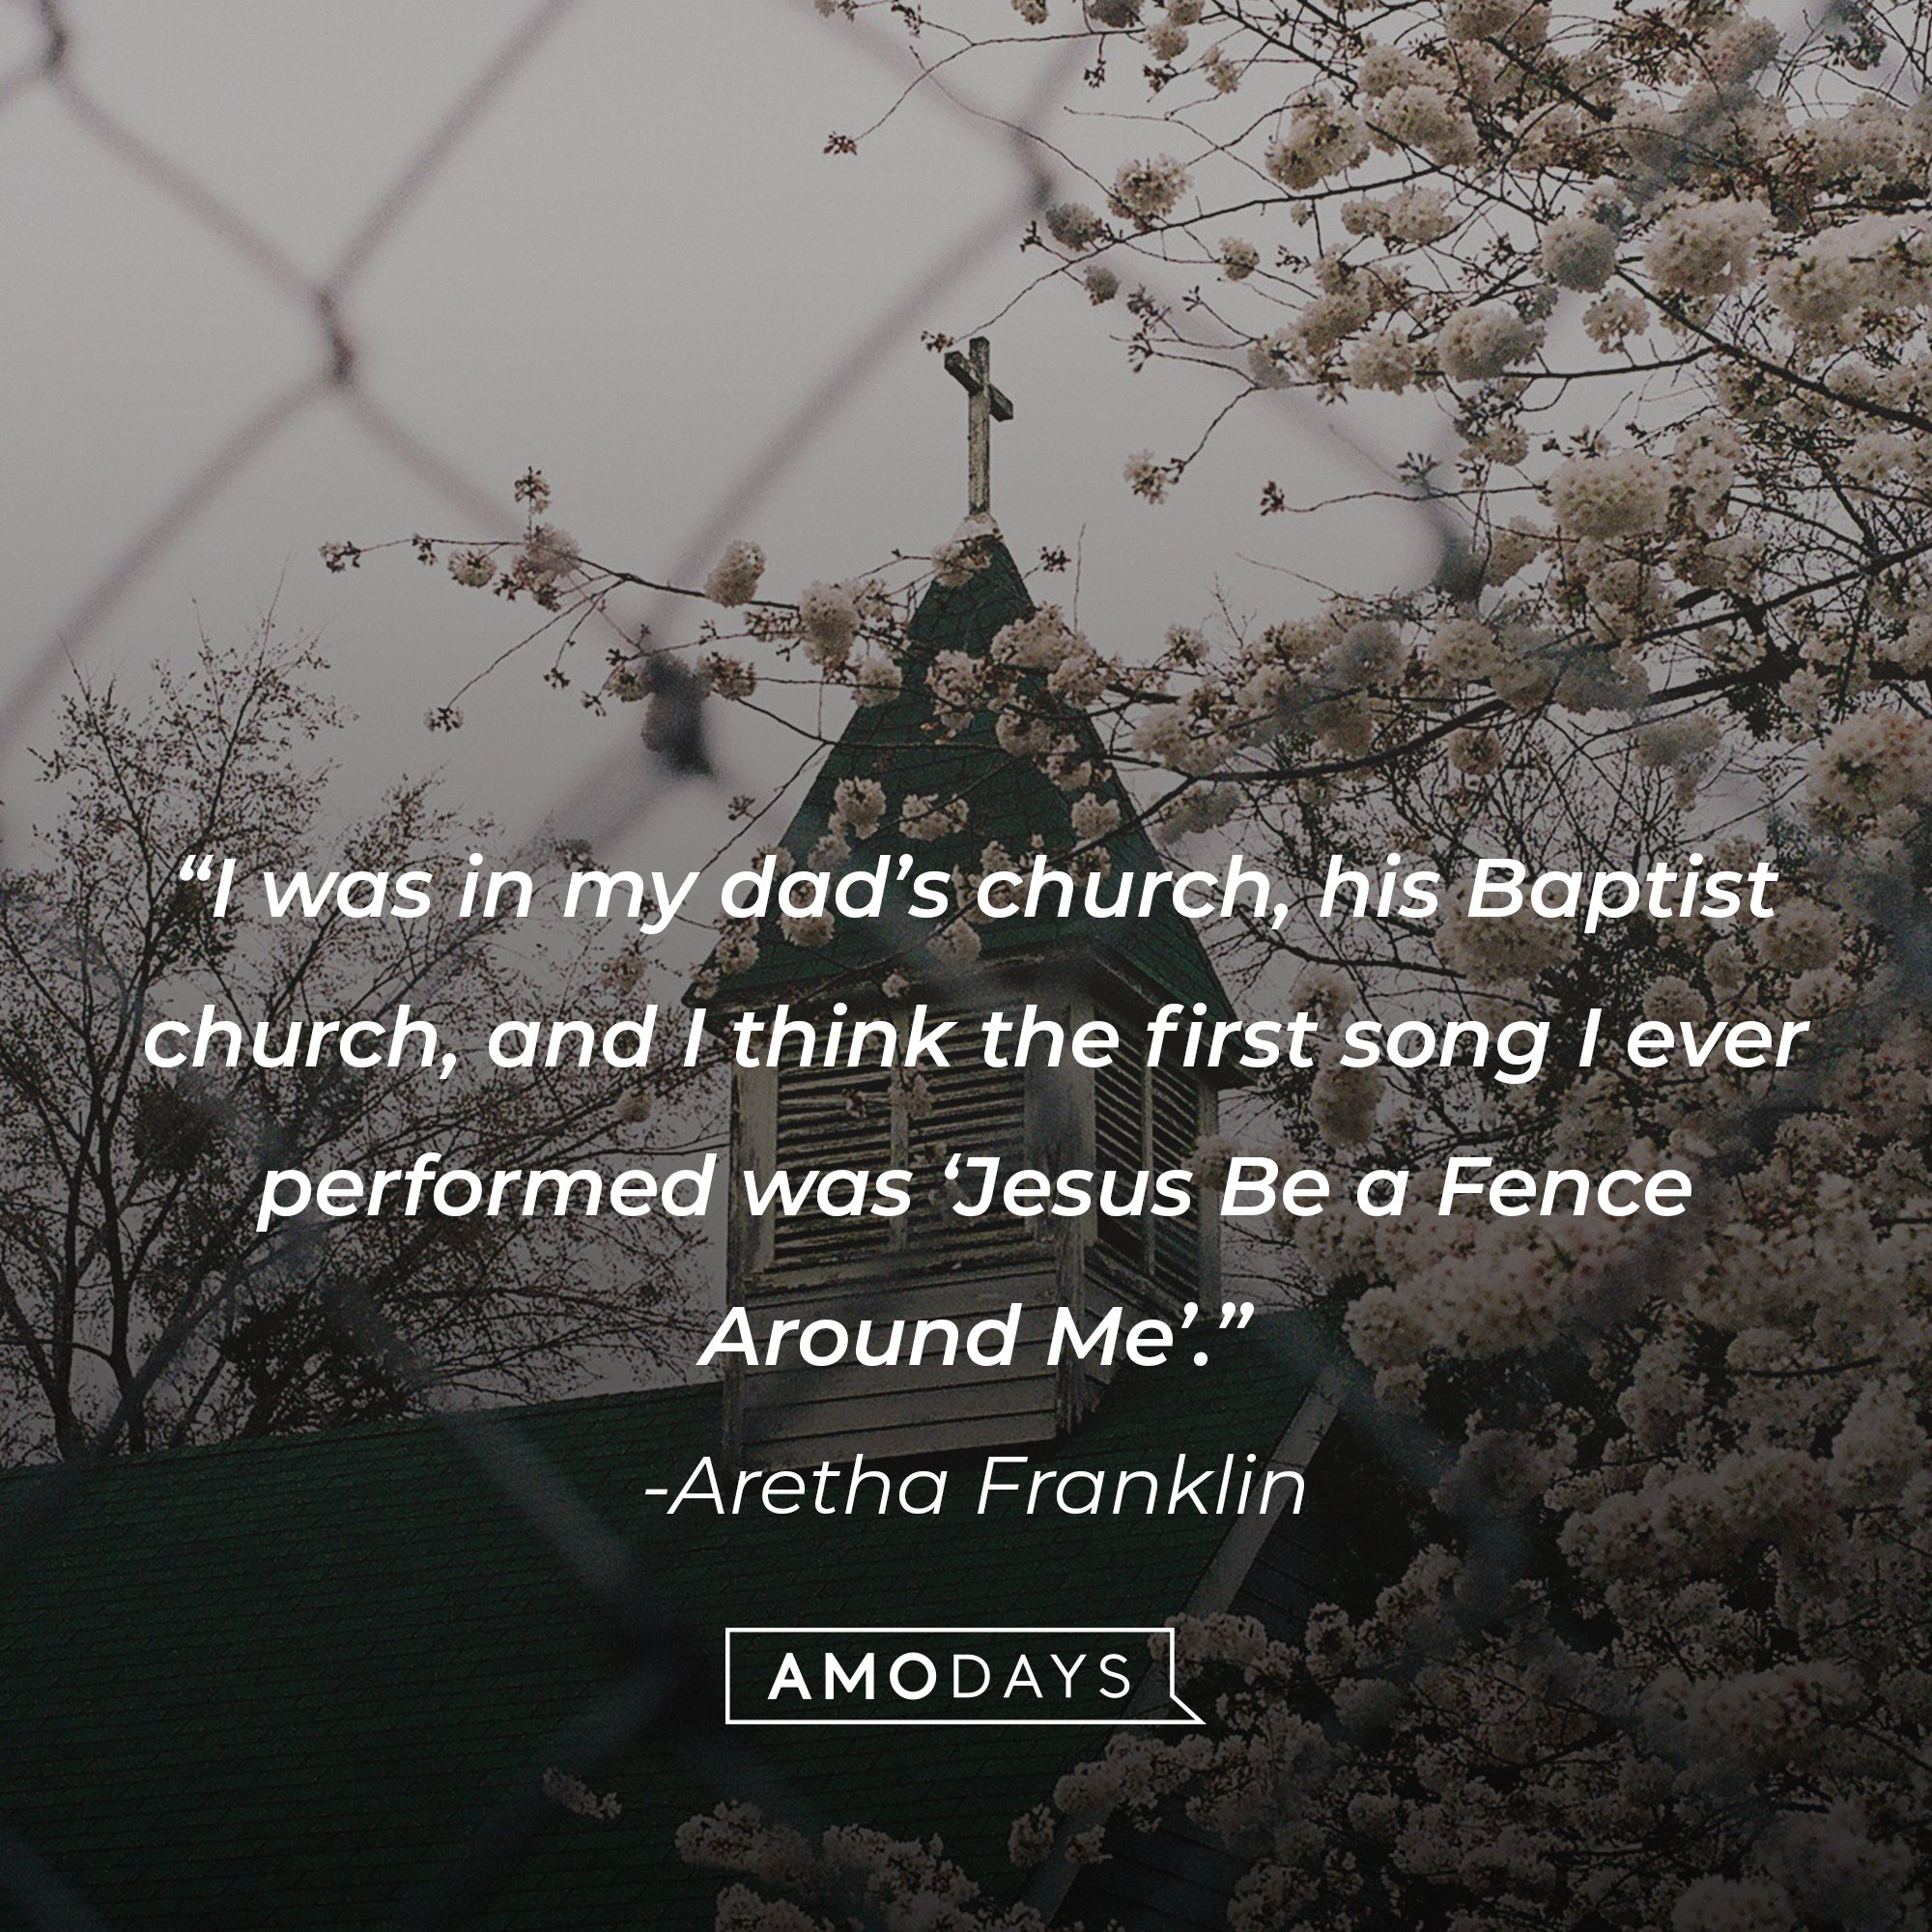 Aretha Franklin's quote: “I was in my dad’s church, his Baptist church, and I think the first song I ever performed was ‘Jesus Be a Fence Around Me’.” | Image: AmoDays